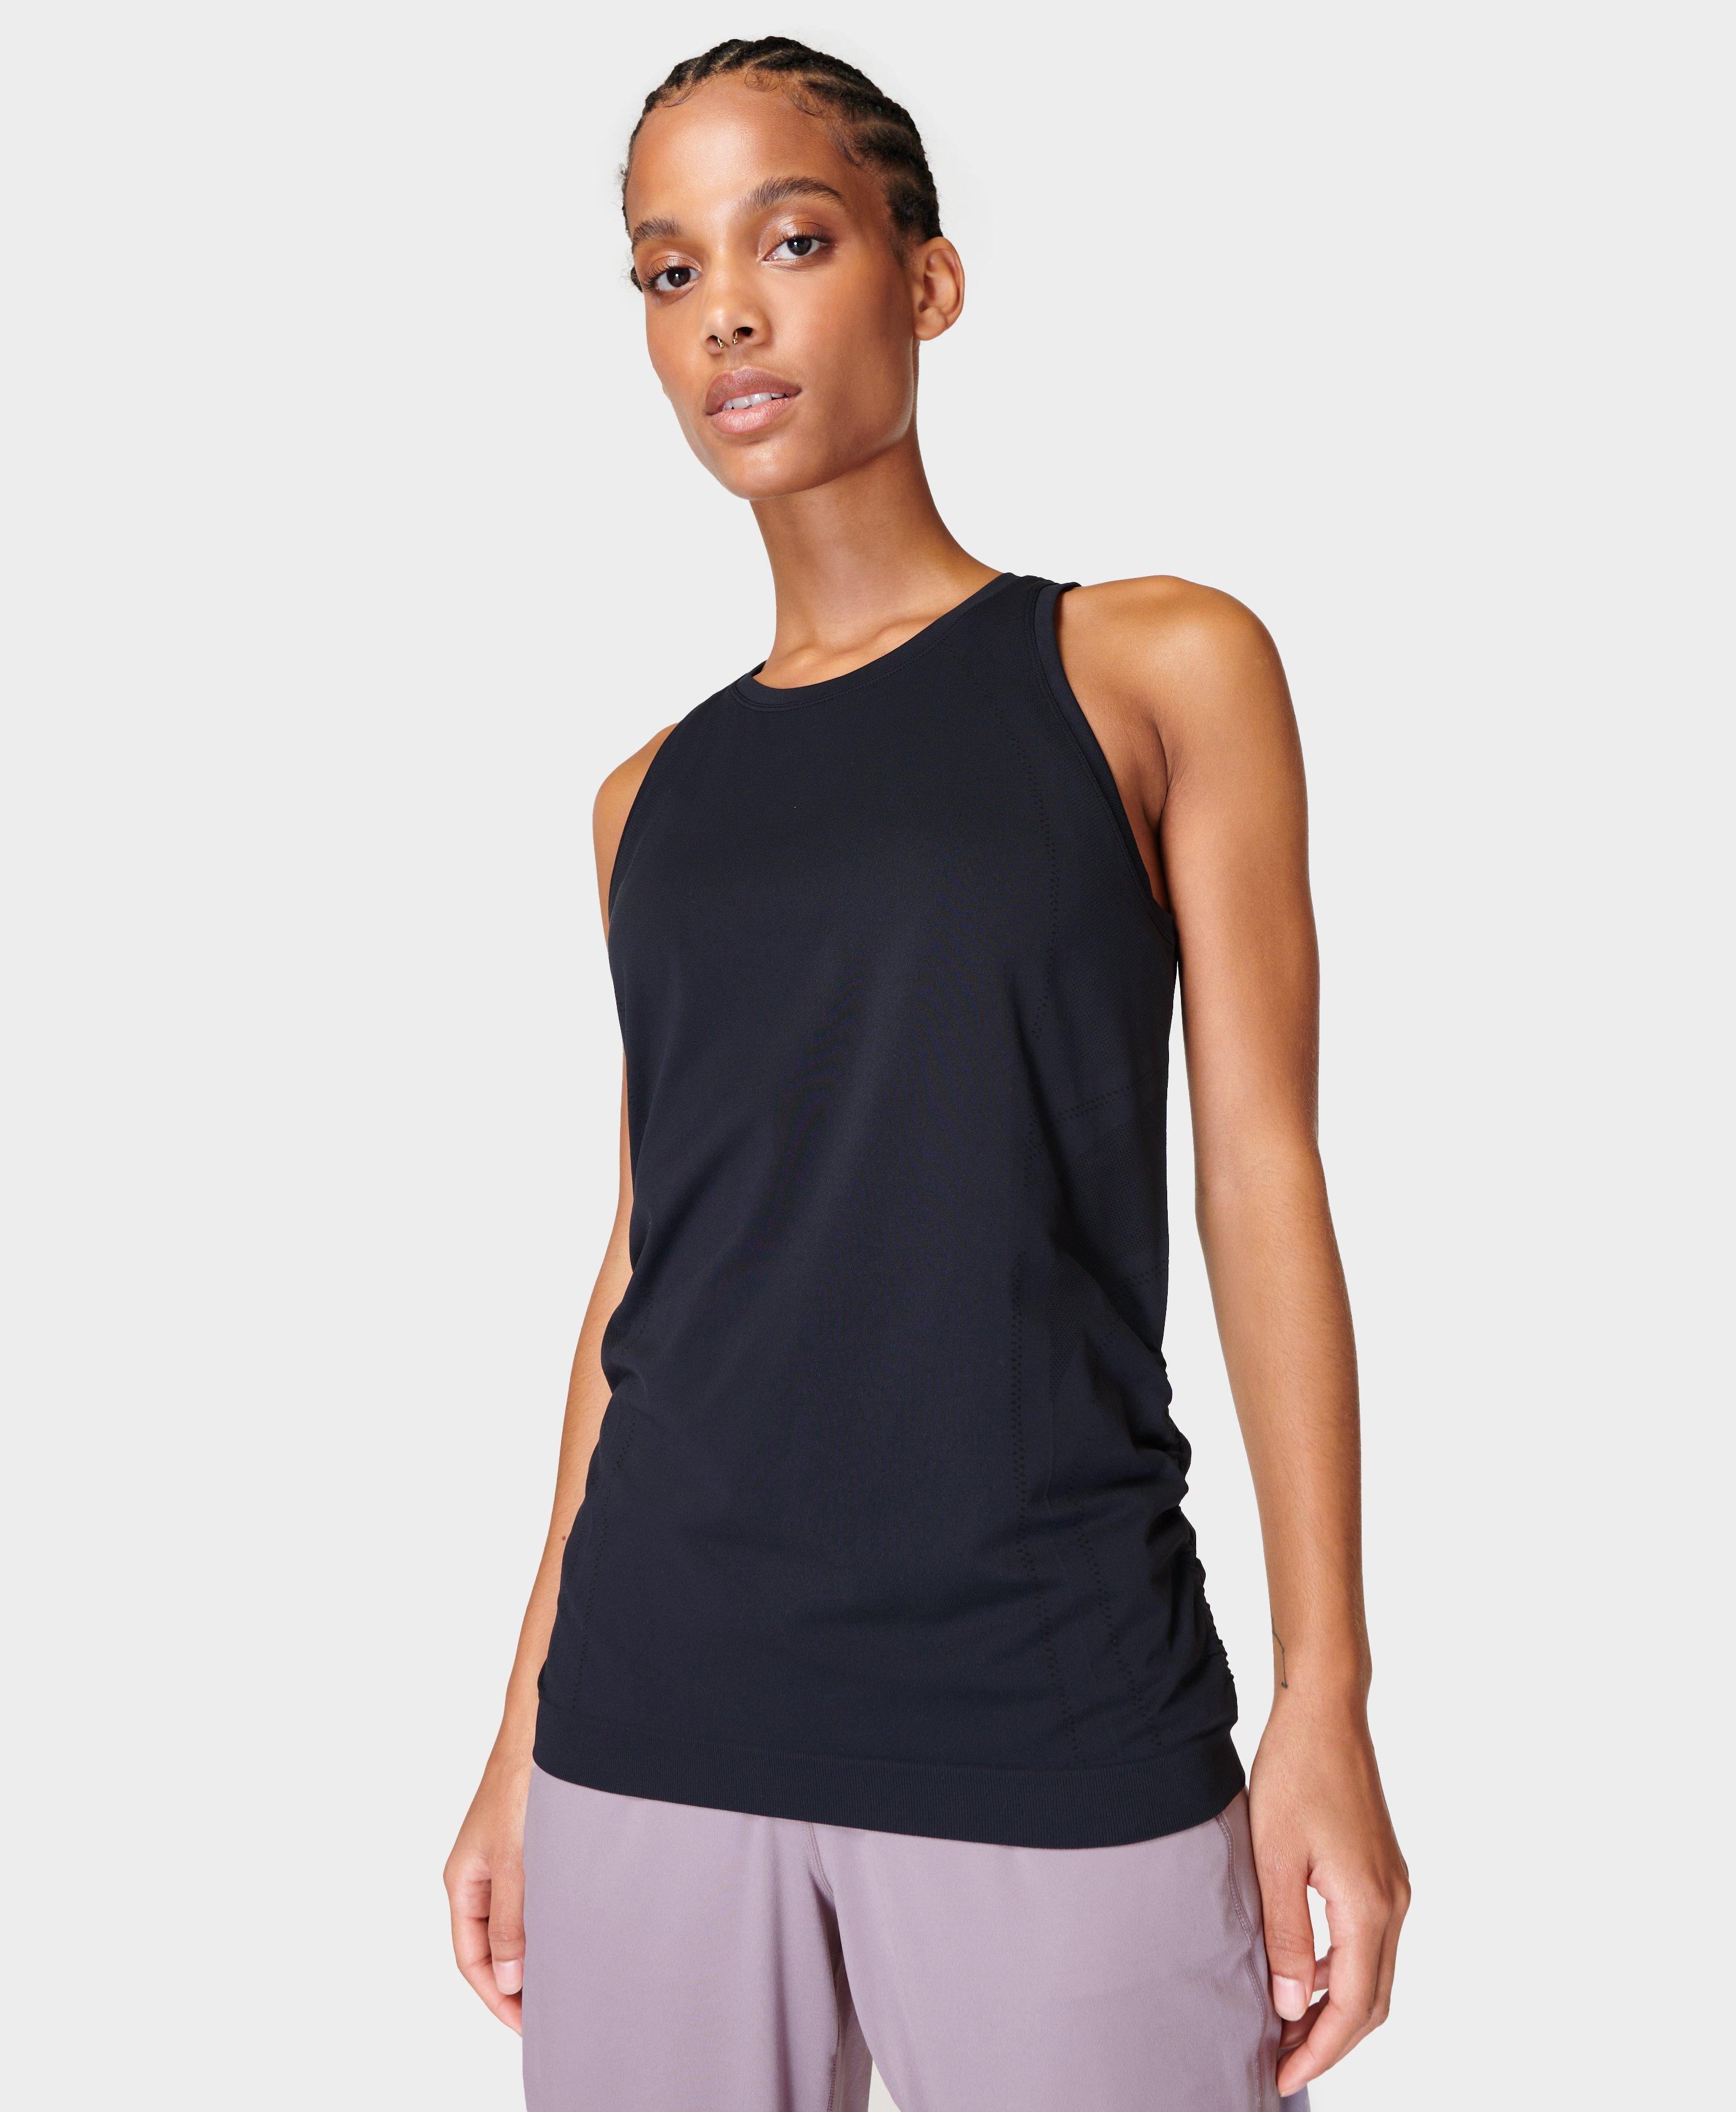 Womens Yoga Vest With Naked Feeling Skin Moisture Absorption And  Perspiration Perfect For Sports, Running, Fitness And Fashion Tanks From  Luyogastar, $16.29